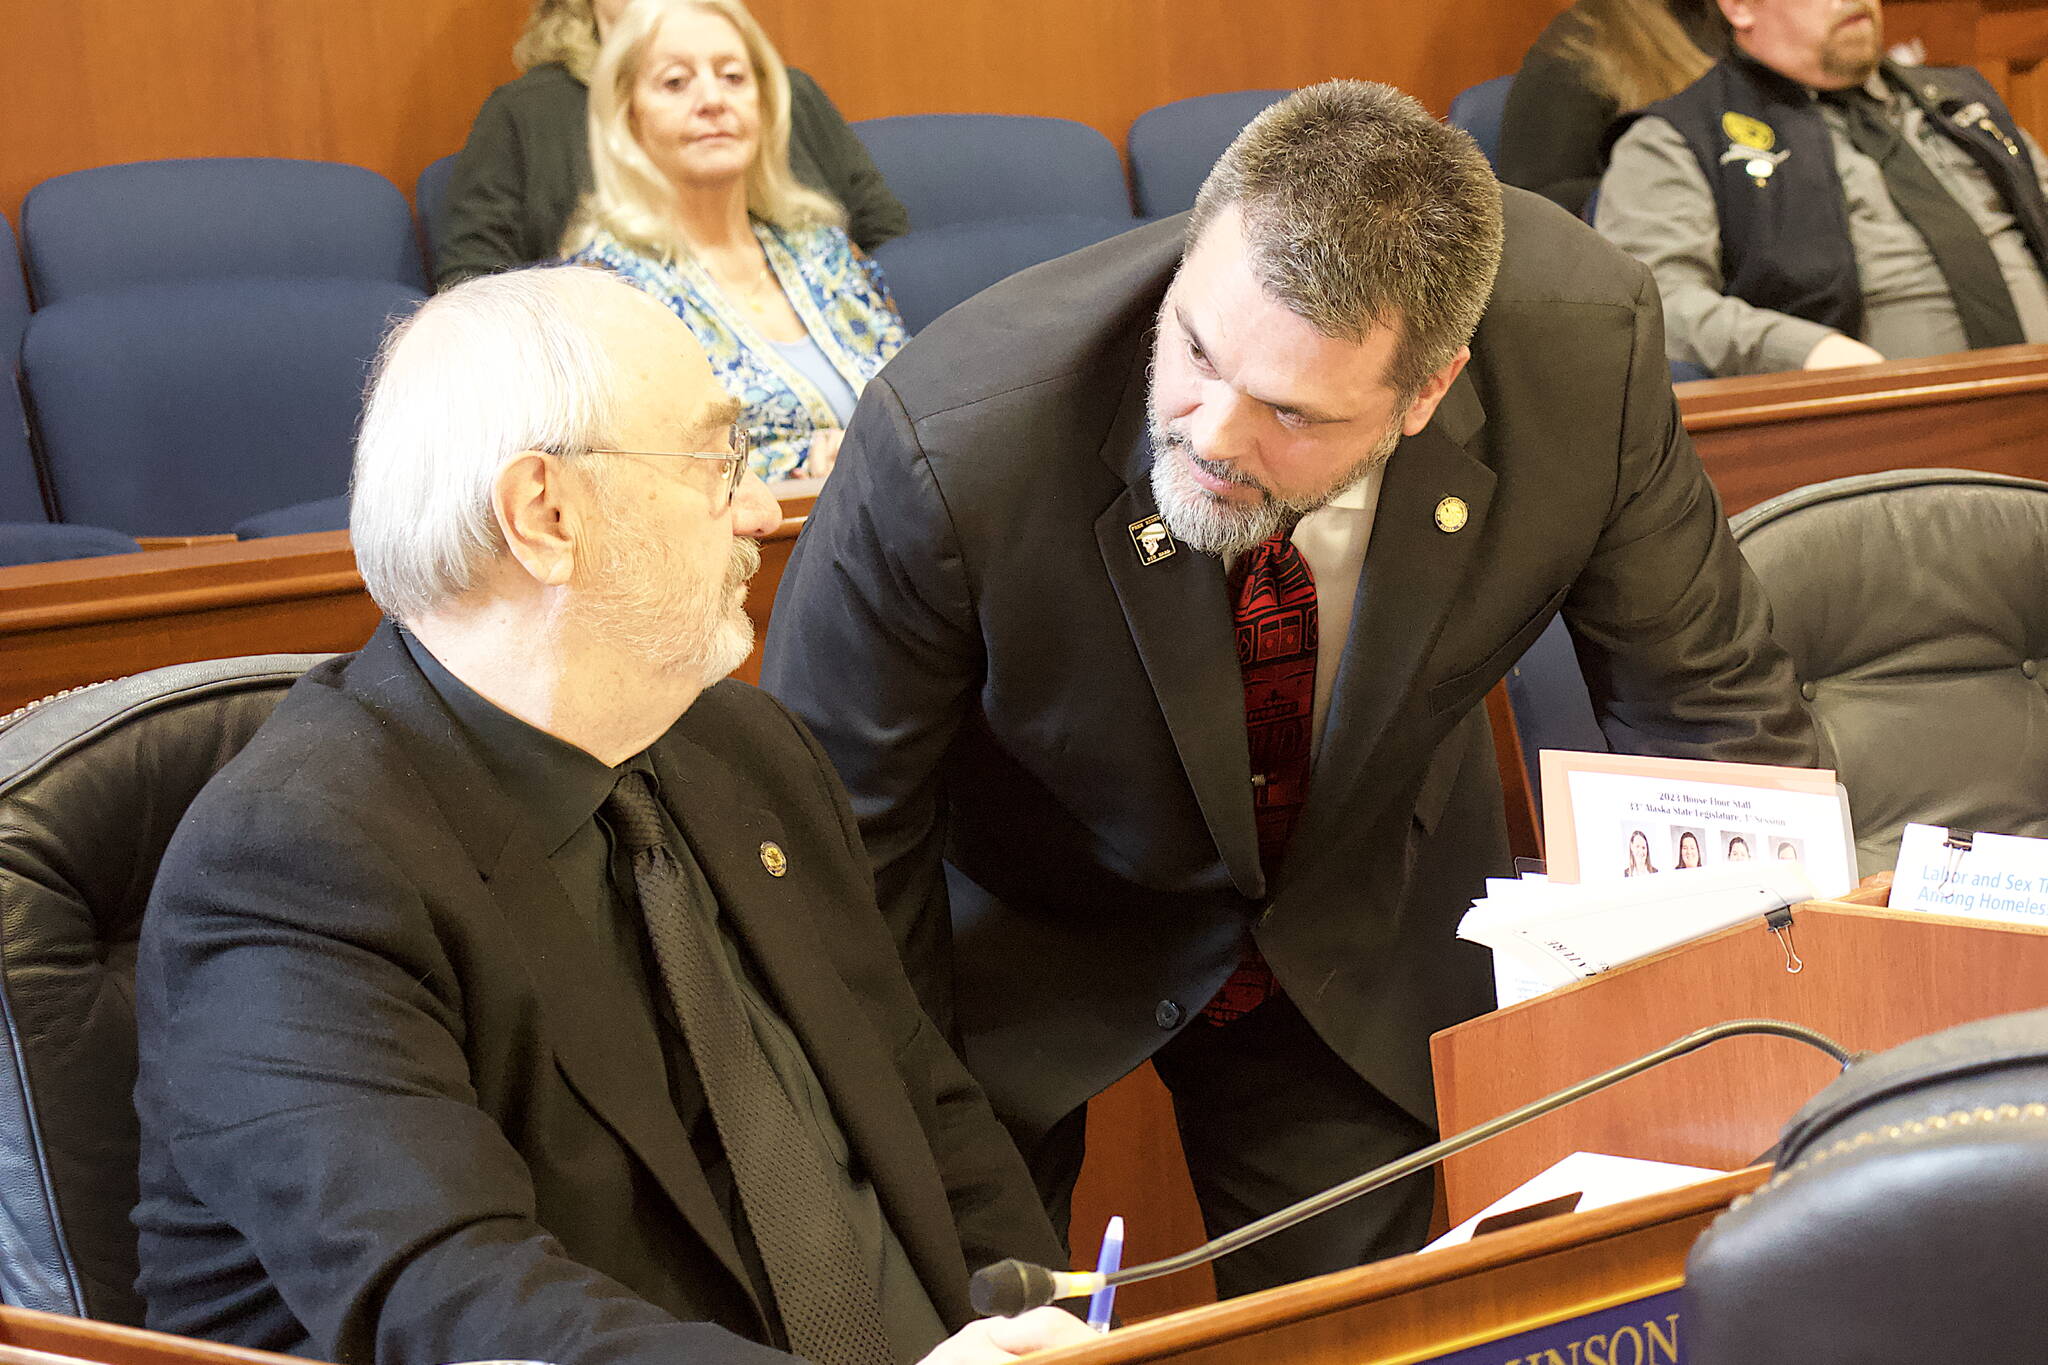 State Rep. Mike Cronk, R-Tok, left, confers with Rep. Craig Johnson, during floor debate Wednesday about a bill prohibiting state and local governments from imposing firearms restrictions during disaster declarations. (Mark Sabbatini / Juneau Empire)